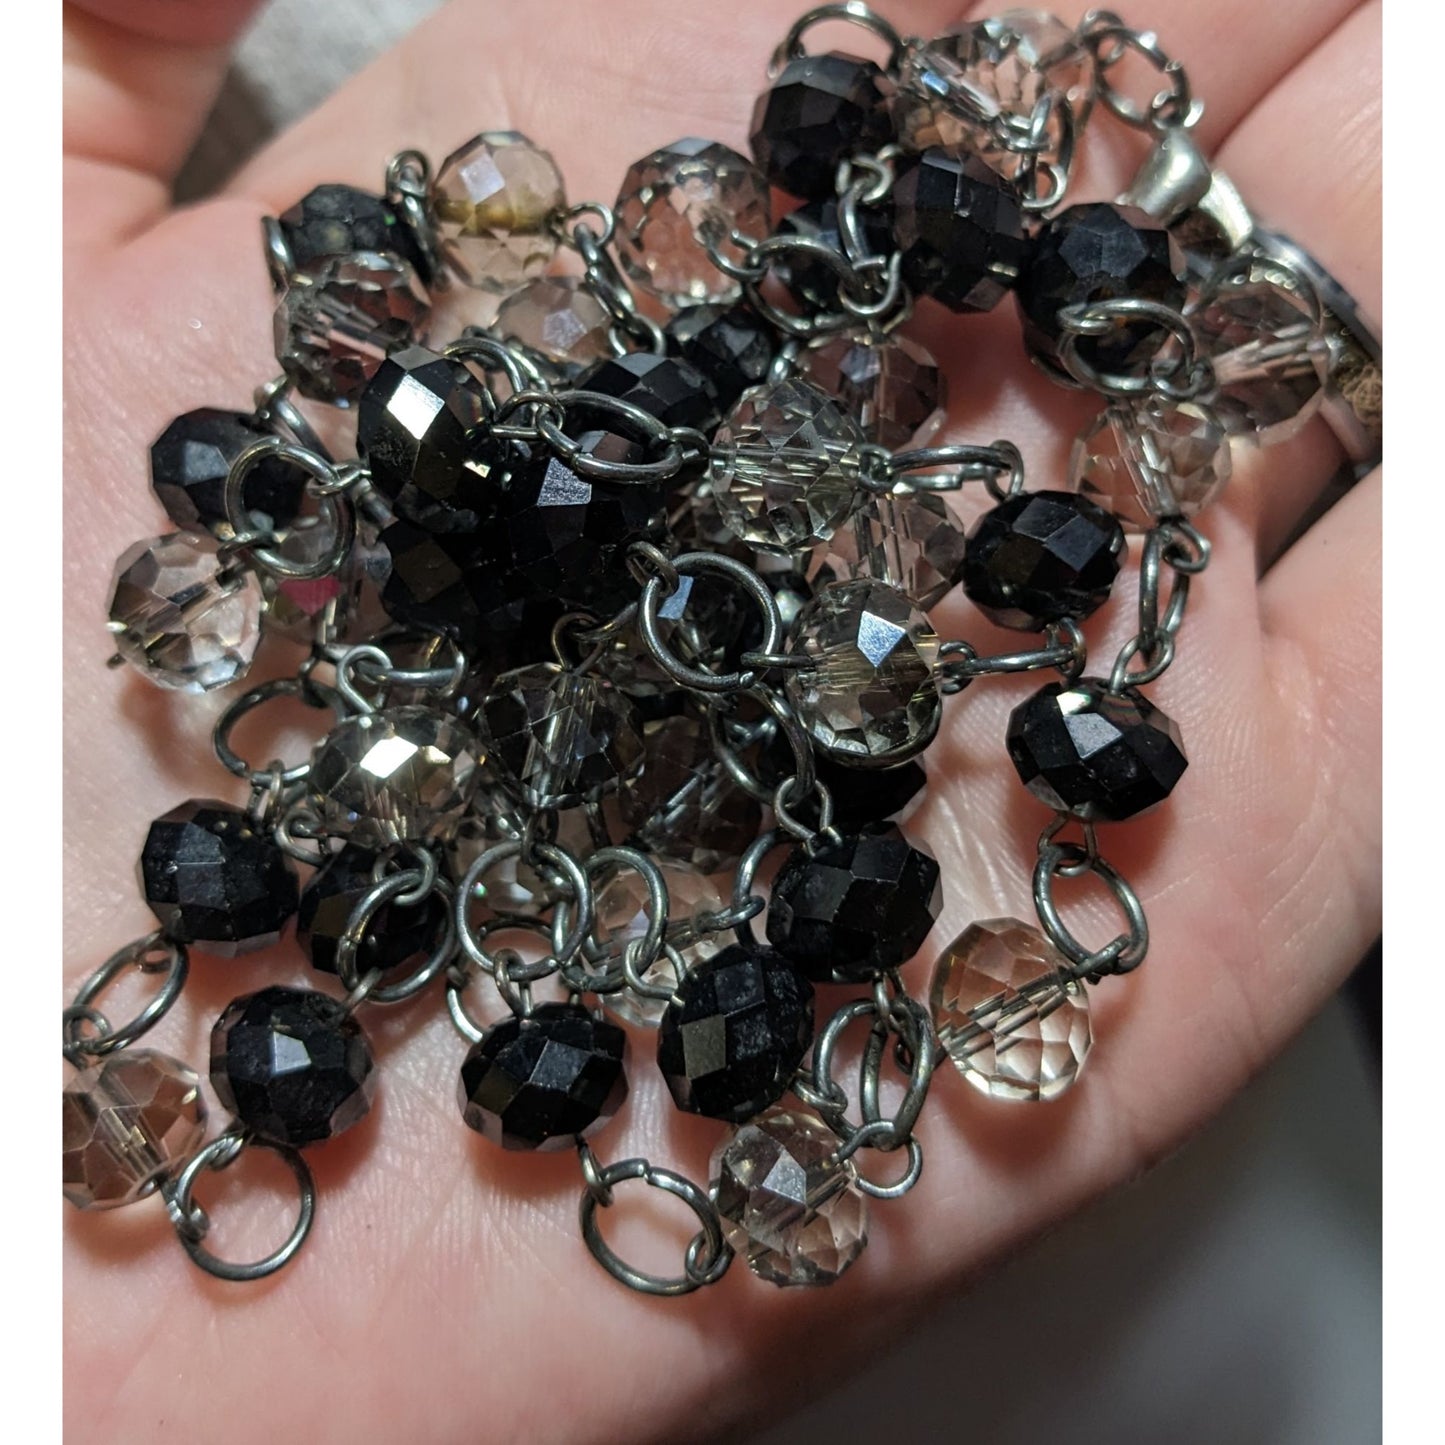 Black And Clear Faceted Glass Necklace